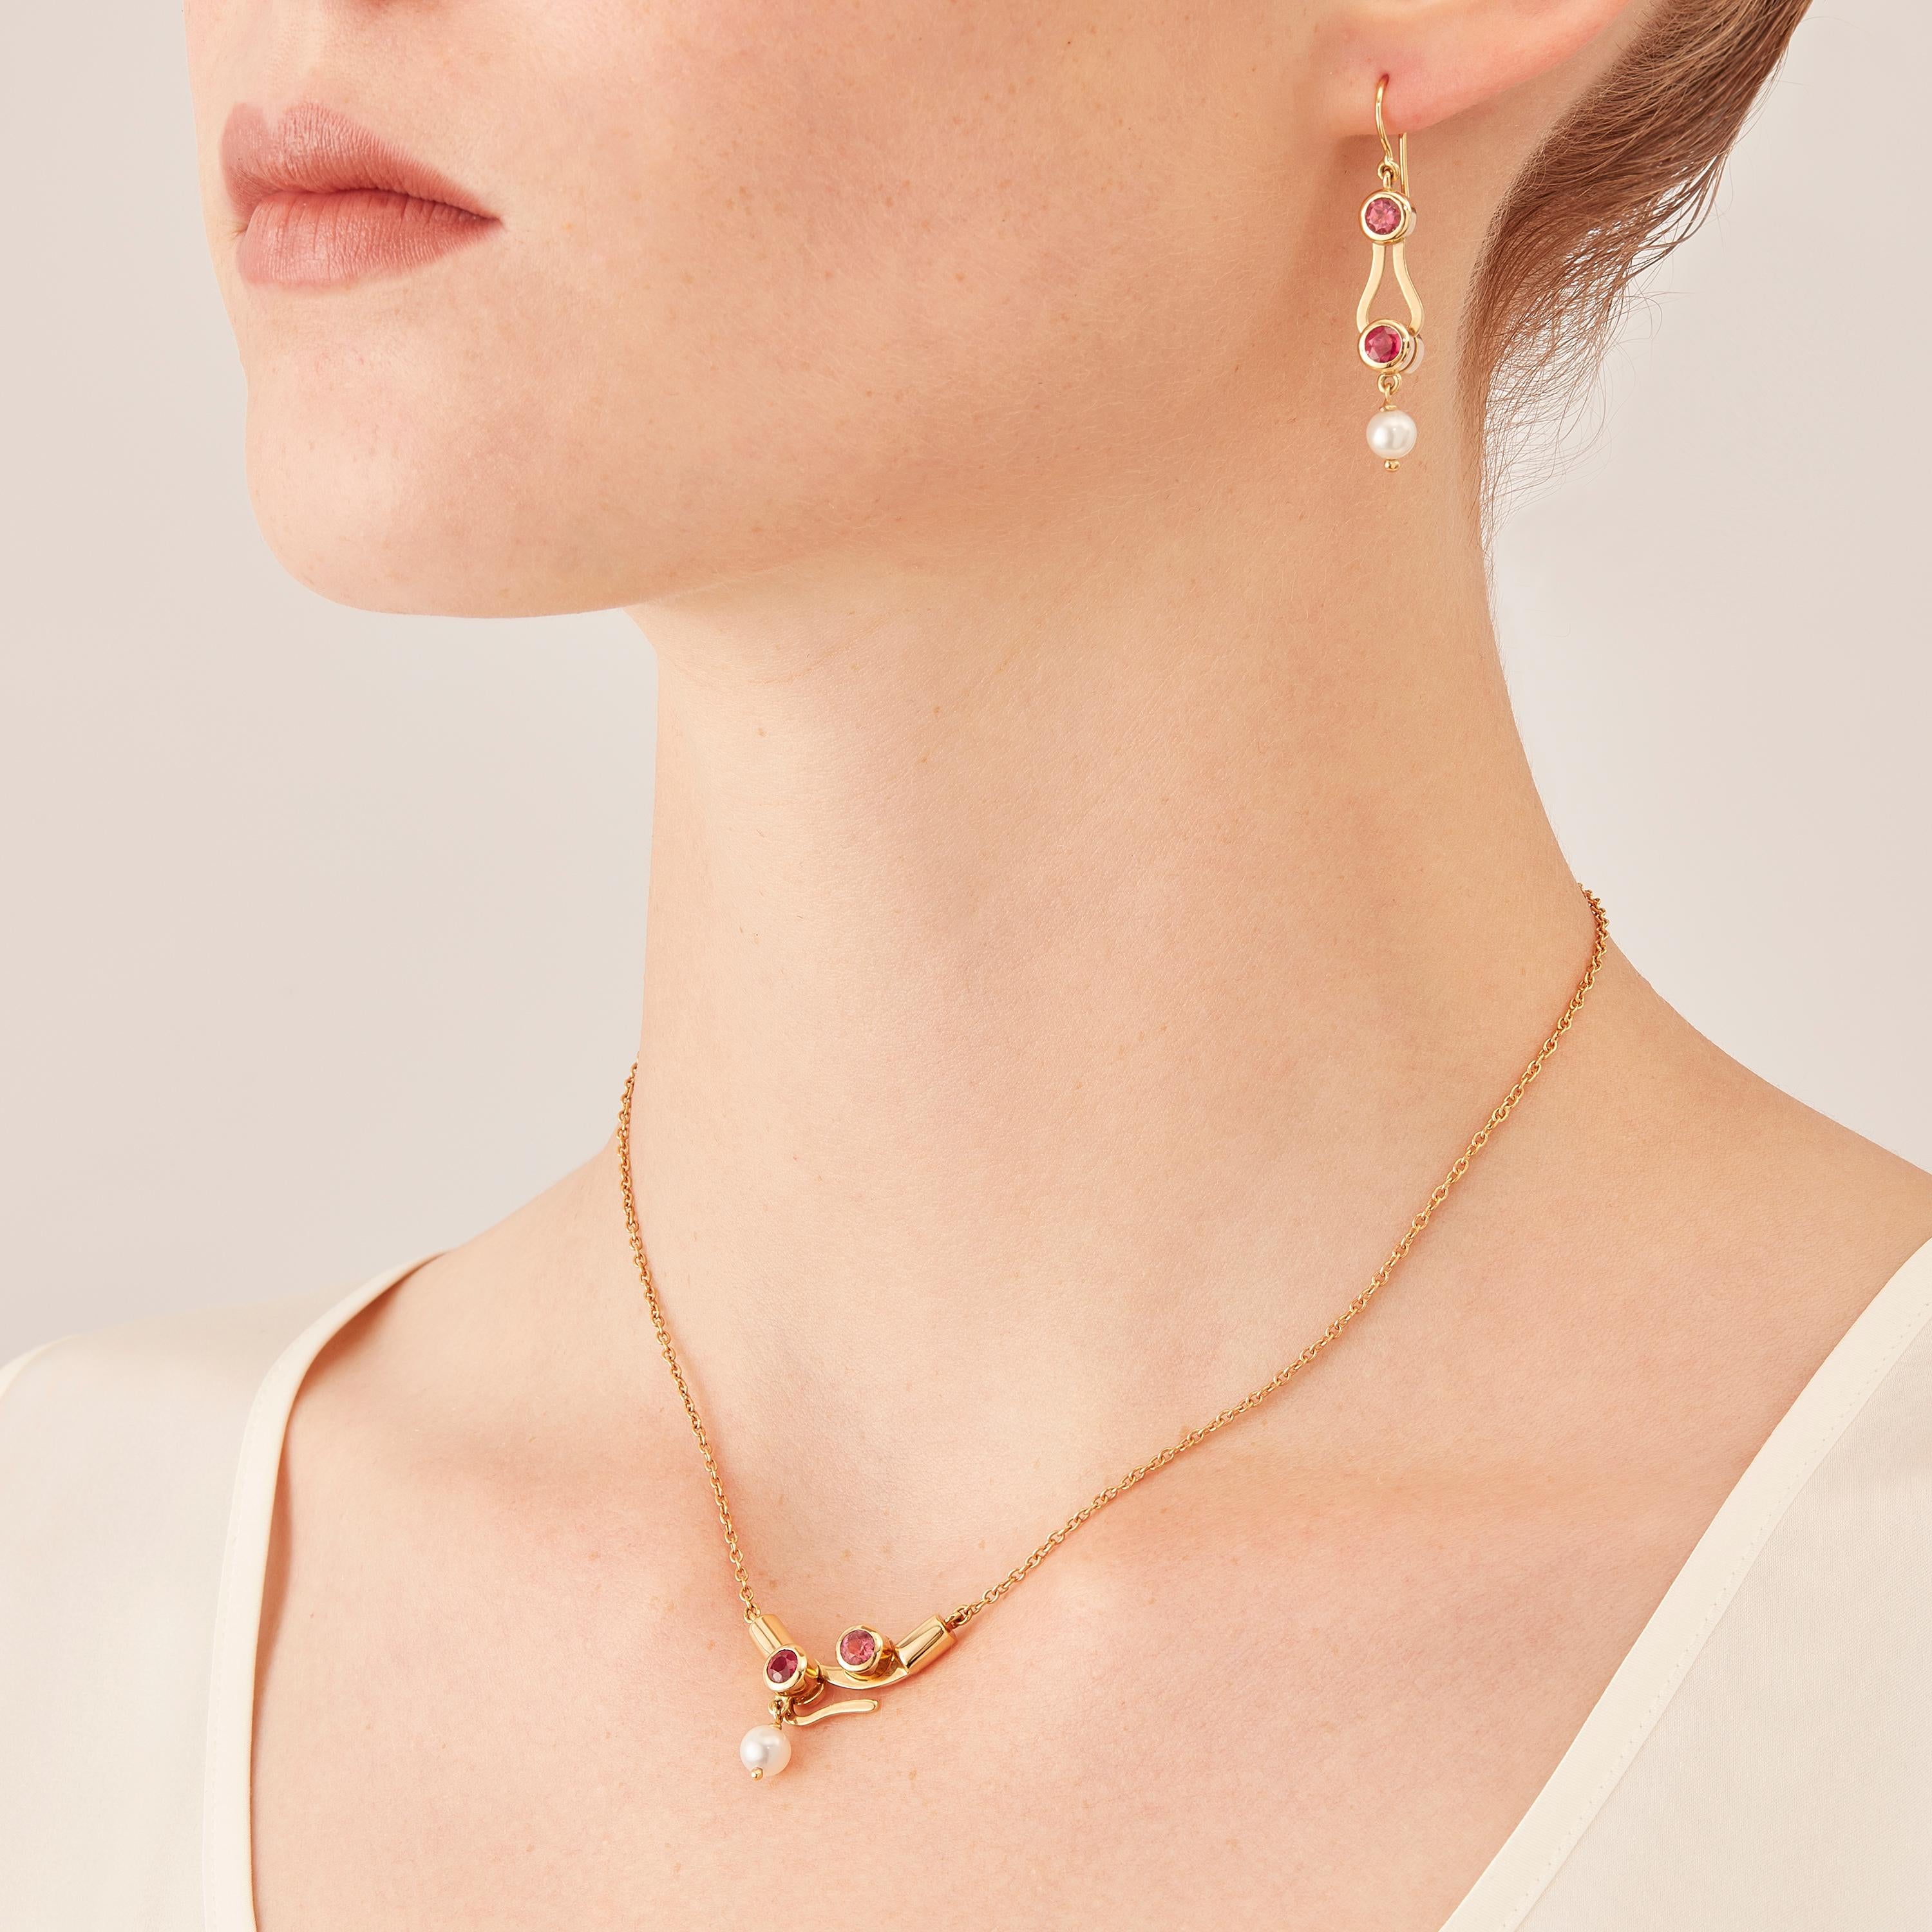 Micro Pendant drop necklace is in 18 karat in rosé gold, a warm, sophisticated color close to yellow gold. It is part of the Microcosmos Series, devised as a game, a construction or a sophisticated aerial mobile. Shapes attached to gold settings